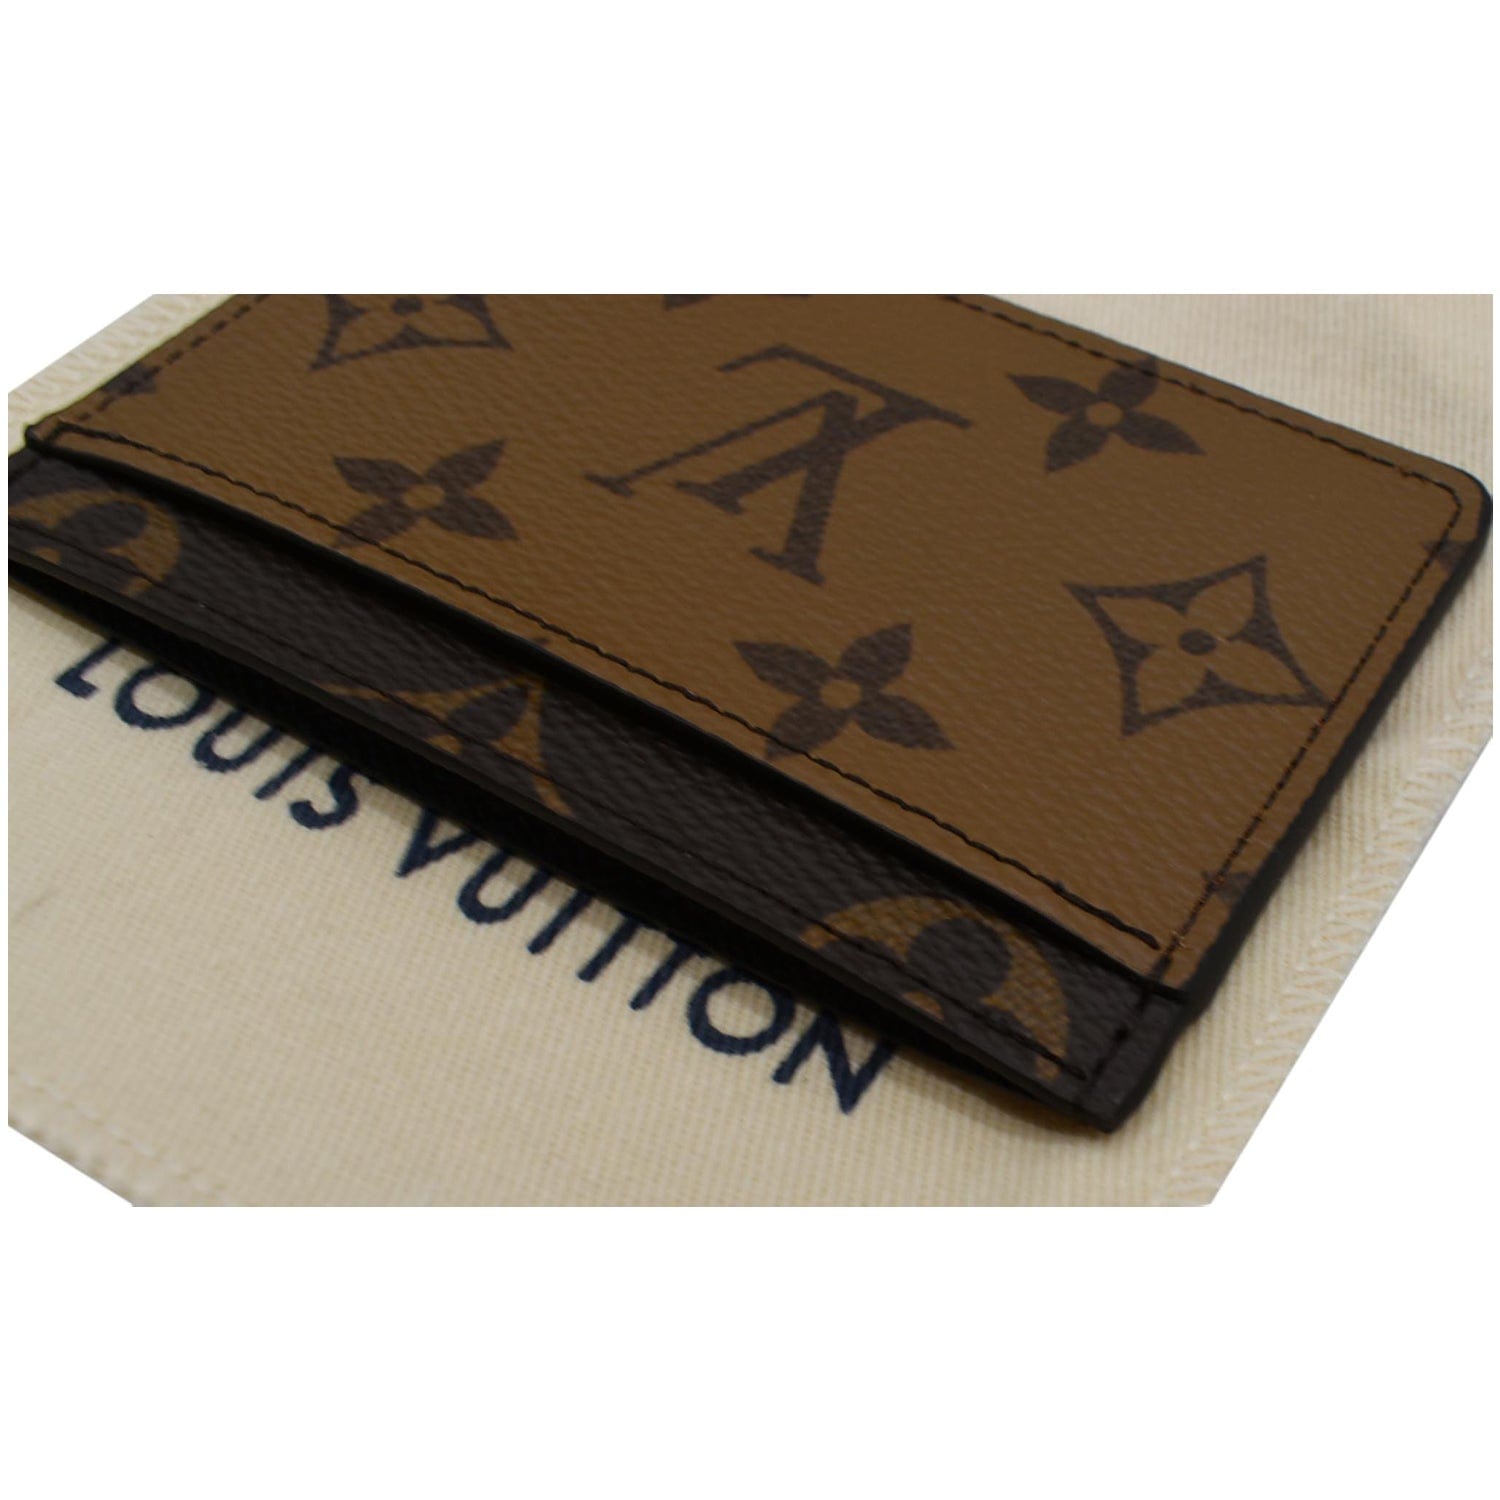  Louis Vuitton Women's Pre-Loved Card Holder, Monogram, Brown,  One Size : Clothing, Shoes & Jewelry